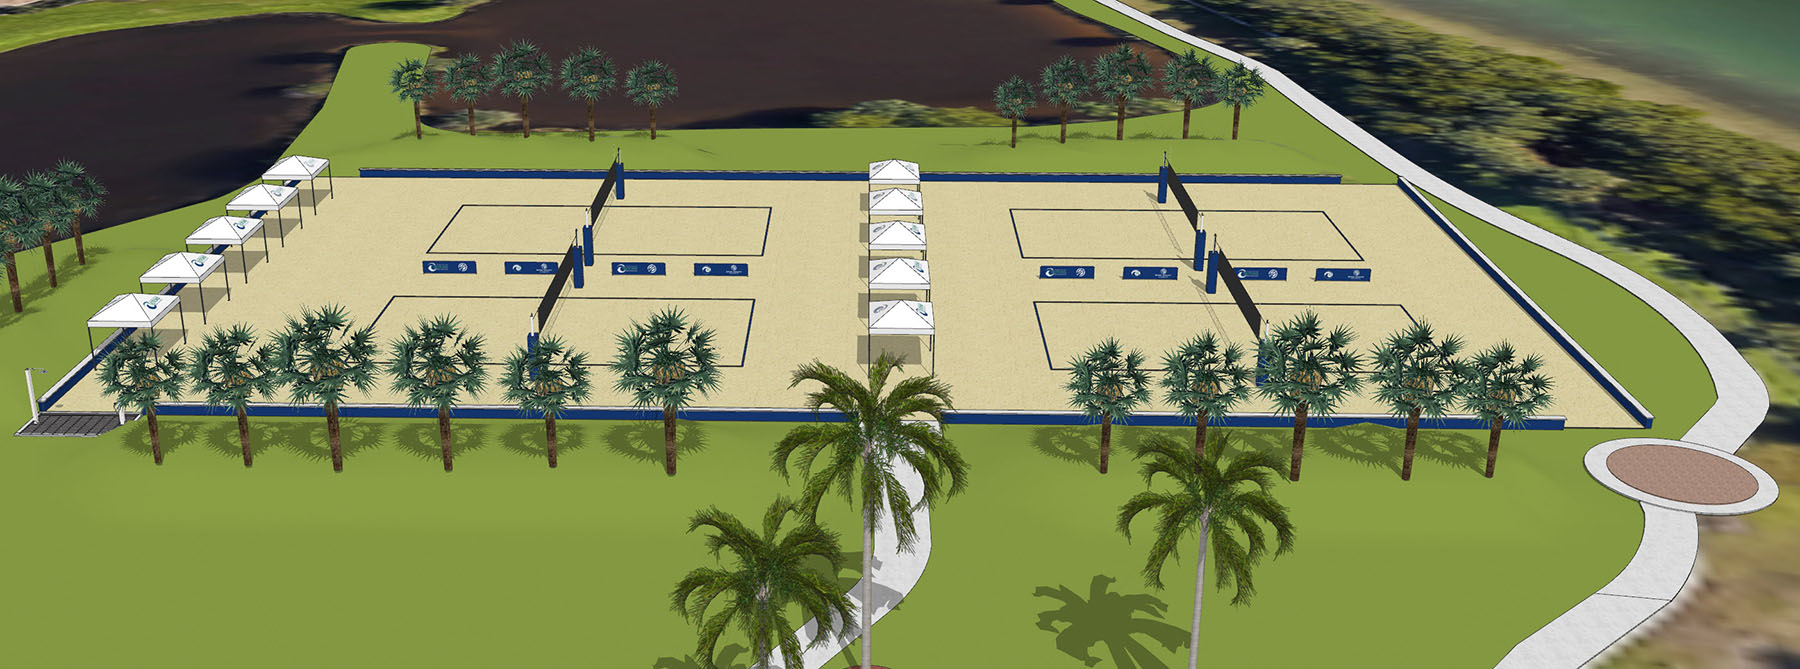 Computer rendering of four volleyball courts surrounded by palm trees and cabanas